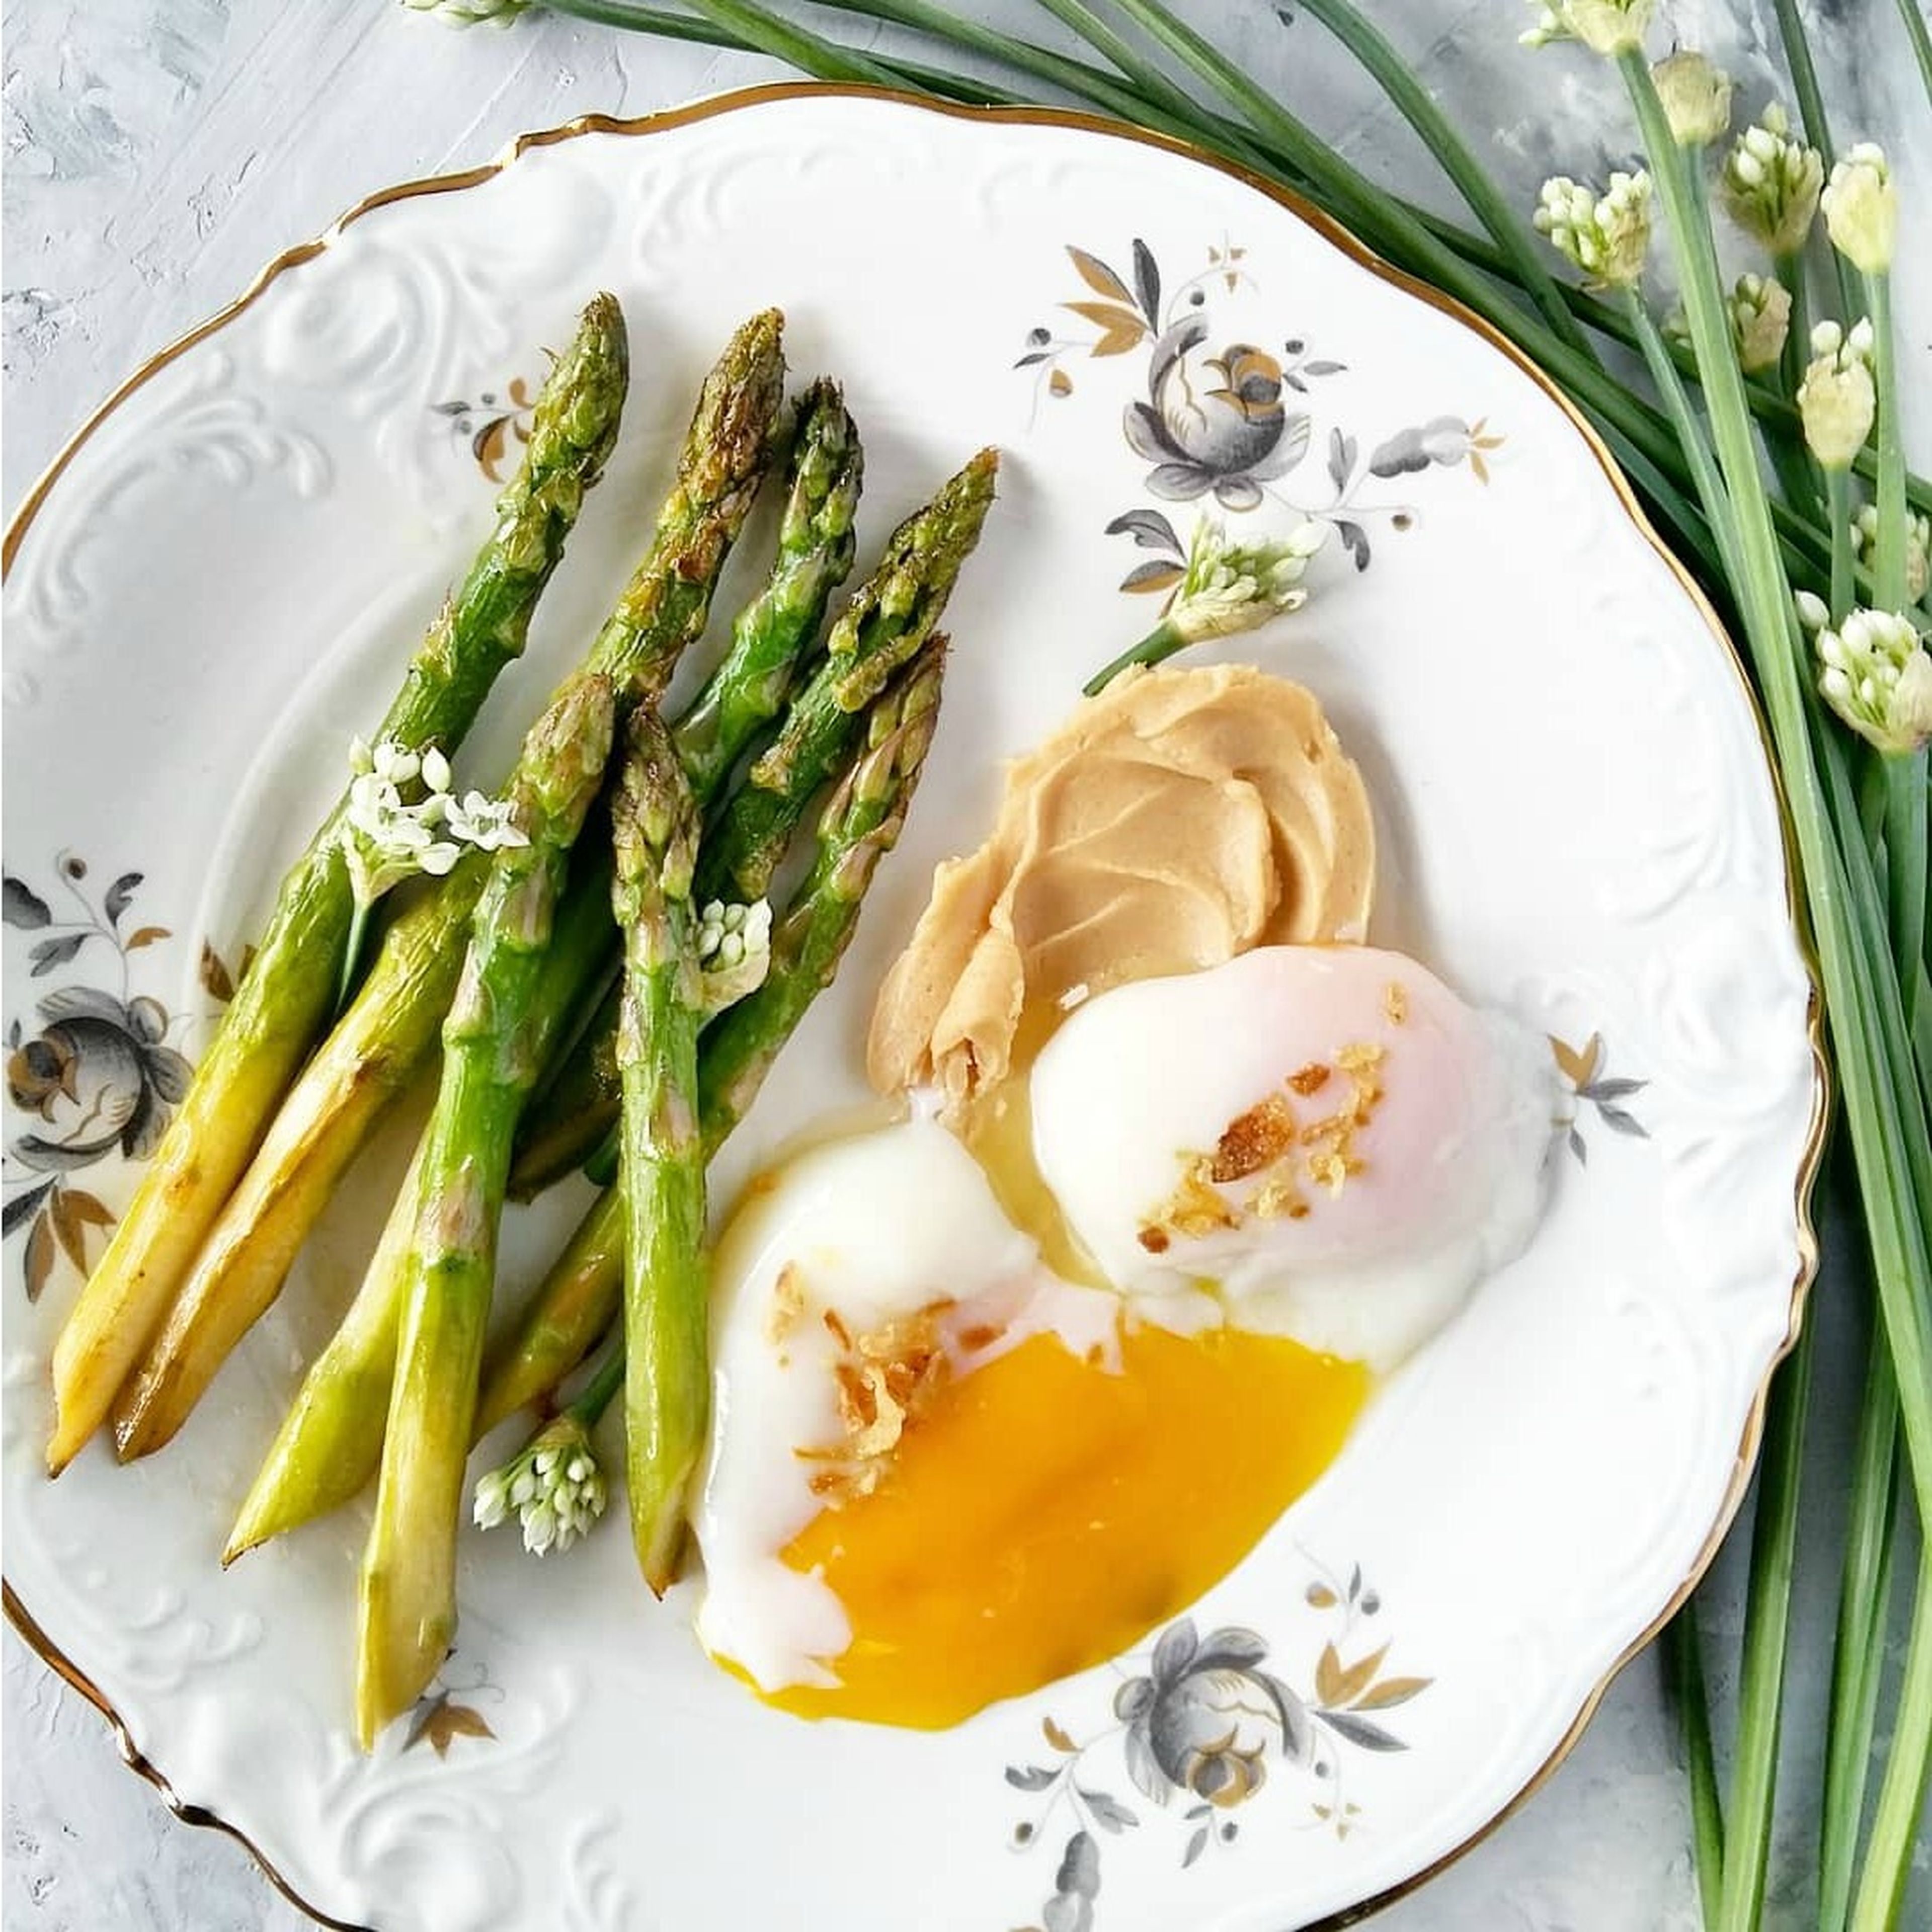 Pan-roasted asparagus and poached eggs